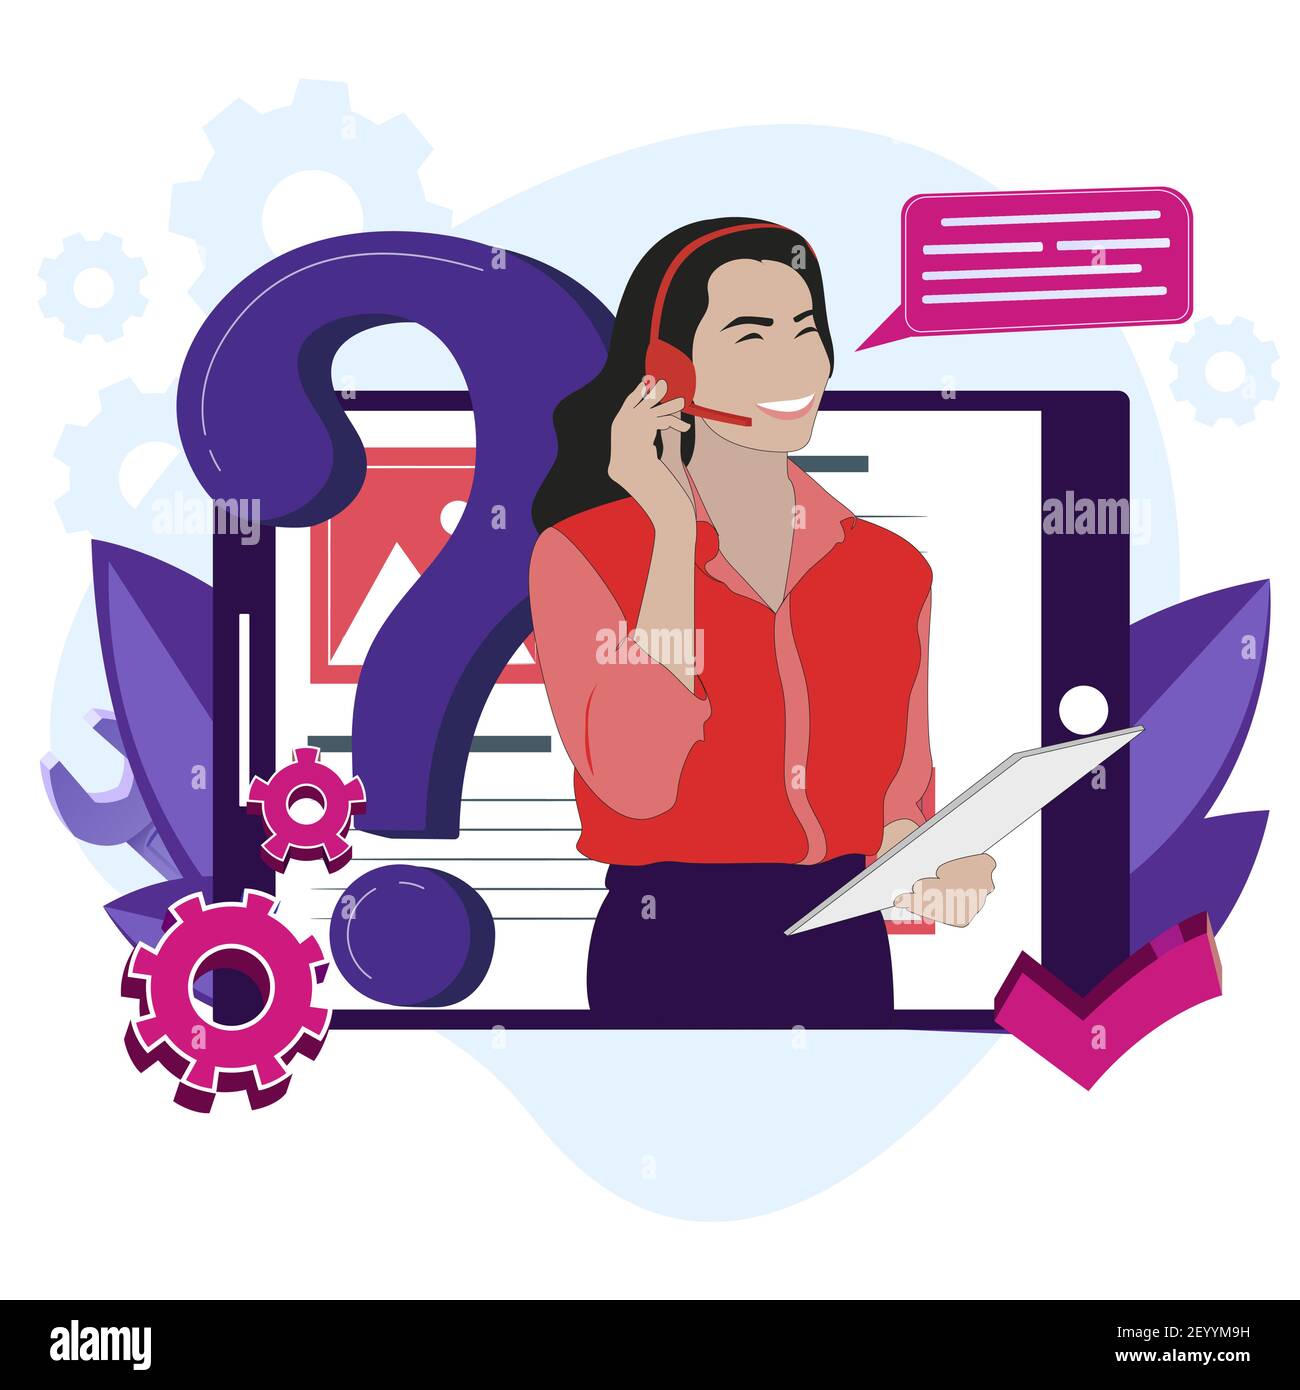 Hotline service online, network help, search faq and assistance, cartoon woman operator, professional support online. Vector illustration Stock Vector